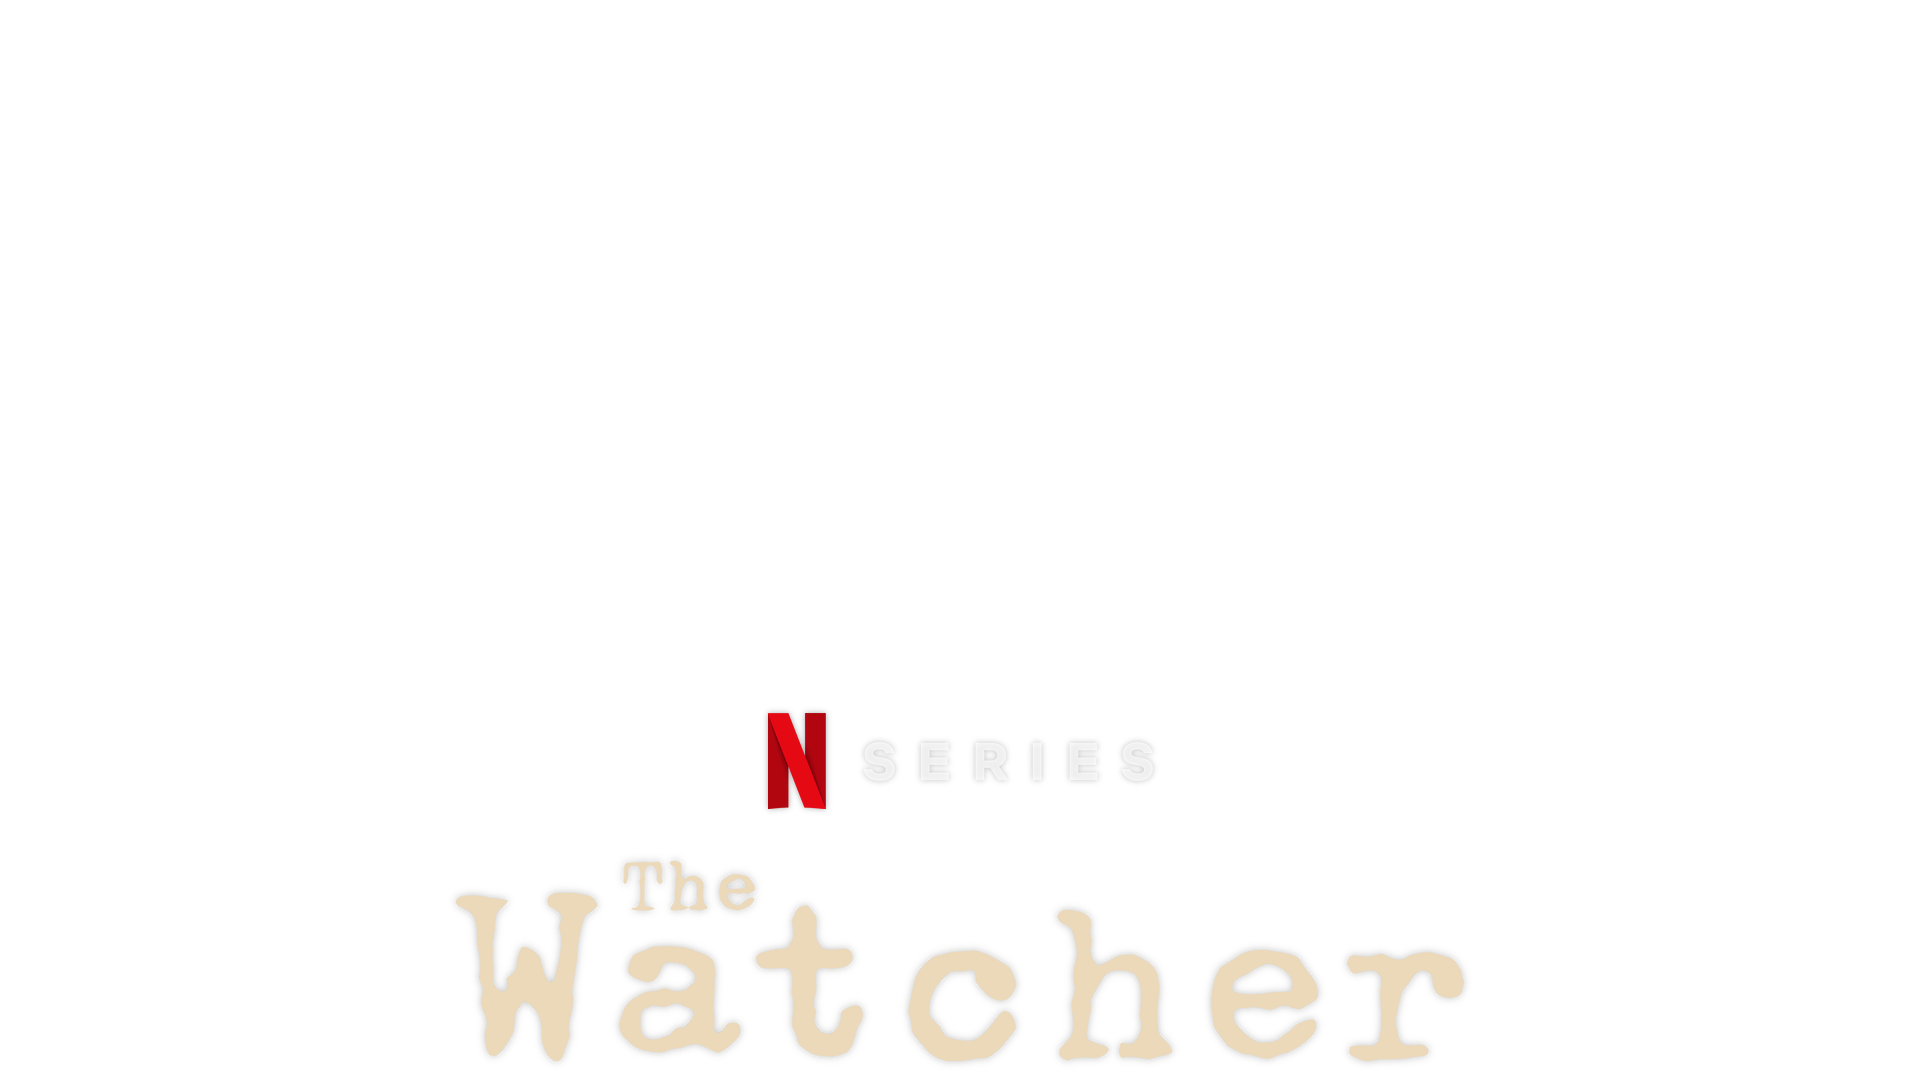 The Watcher Cast, News, Videos and more